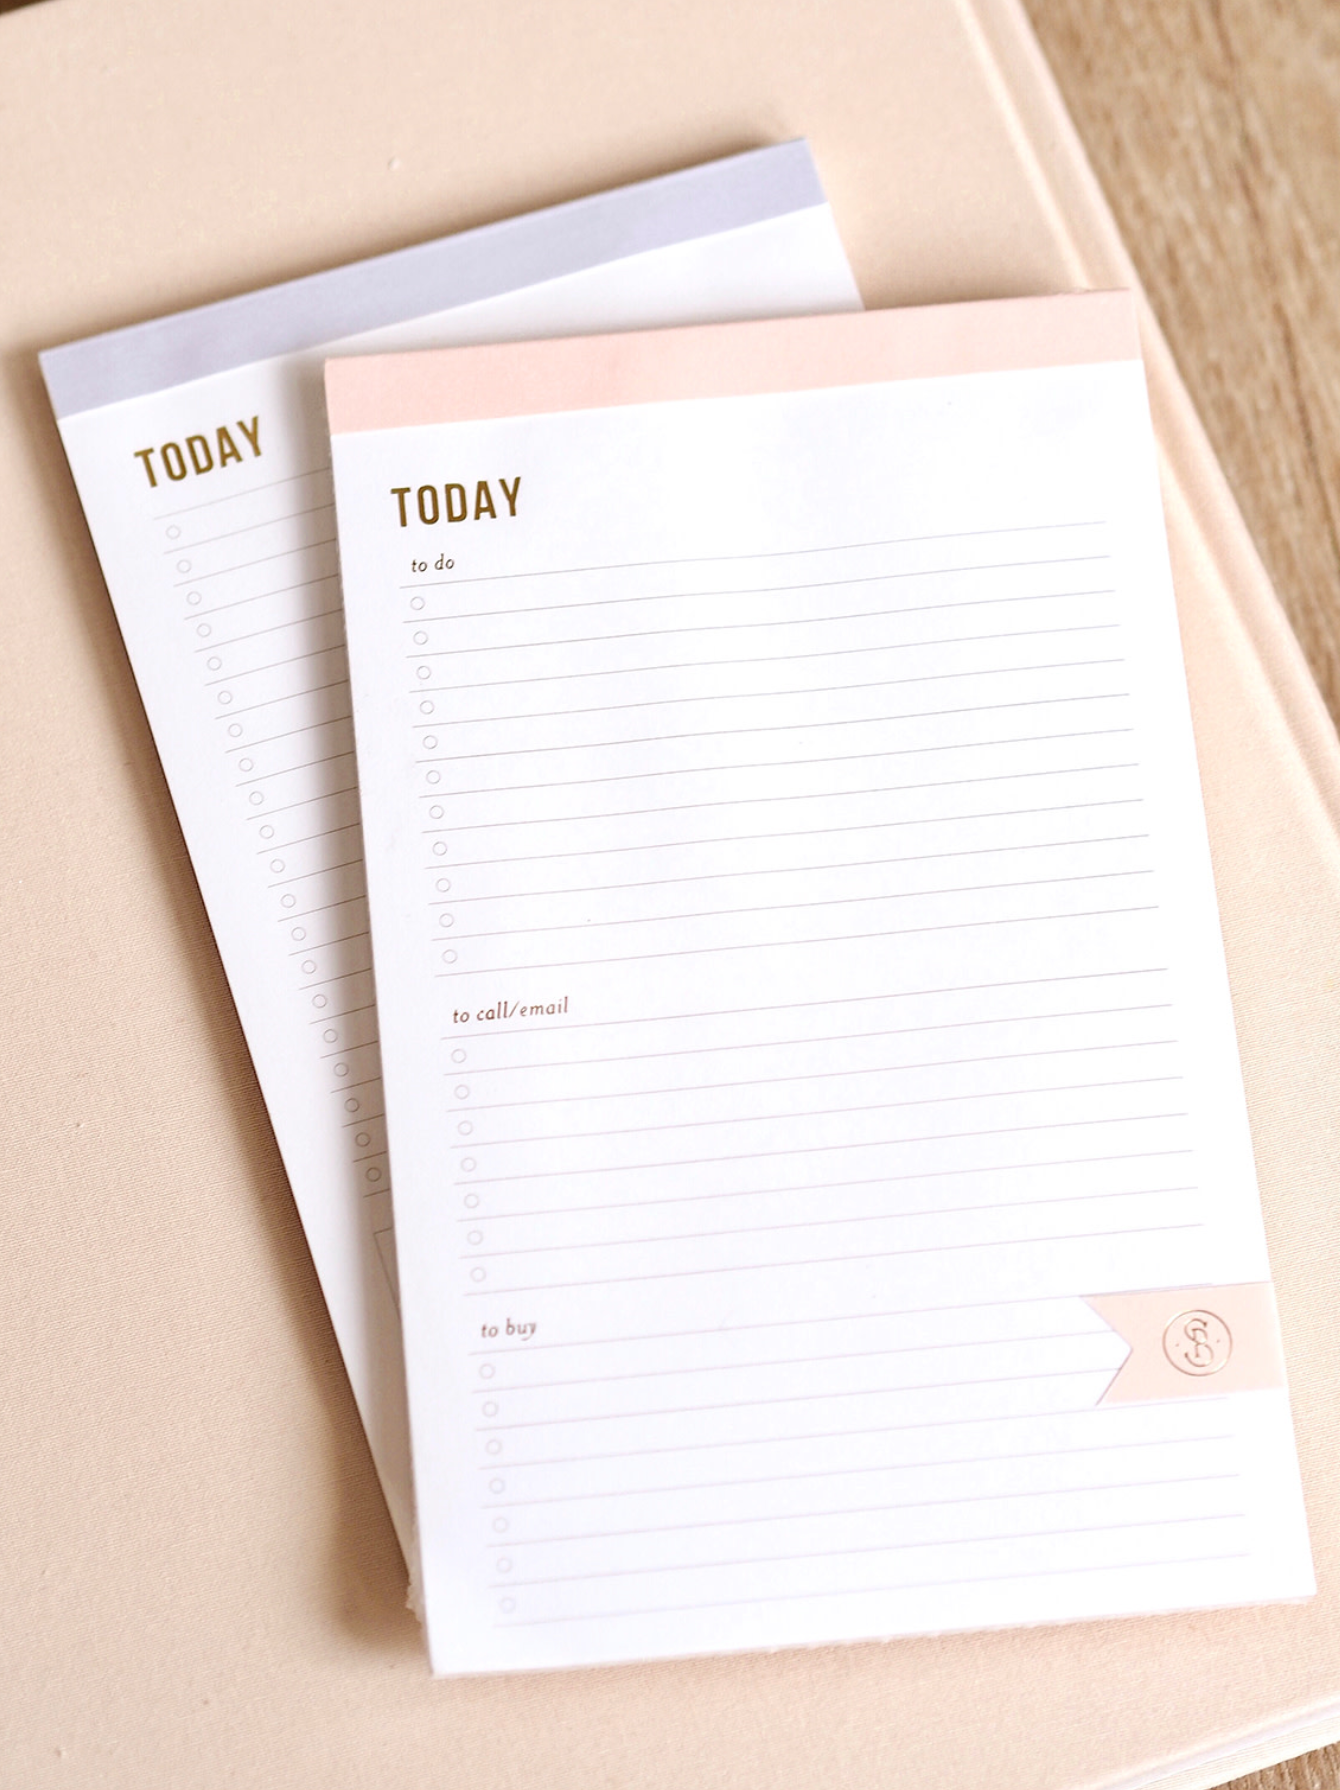 Today Notepads